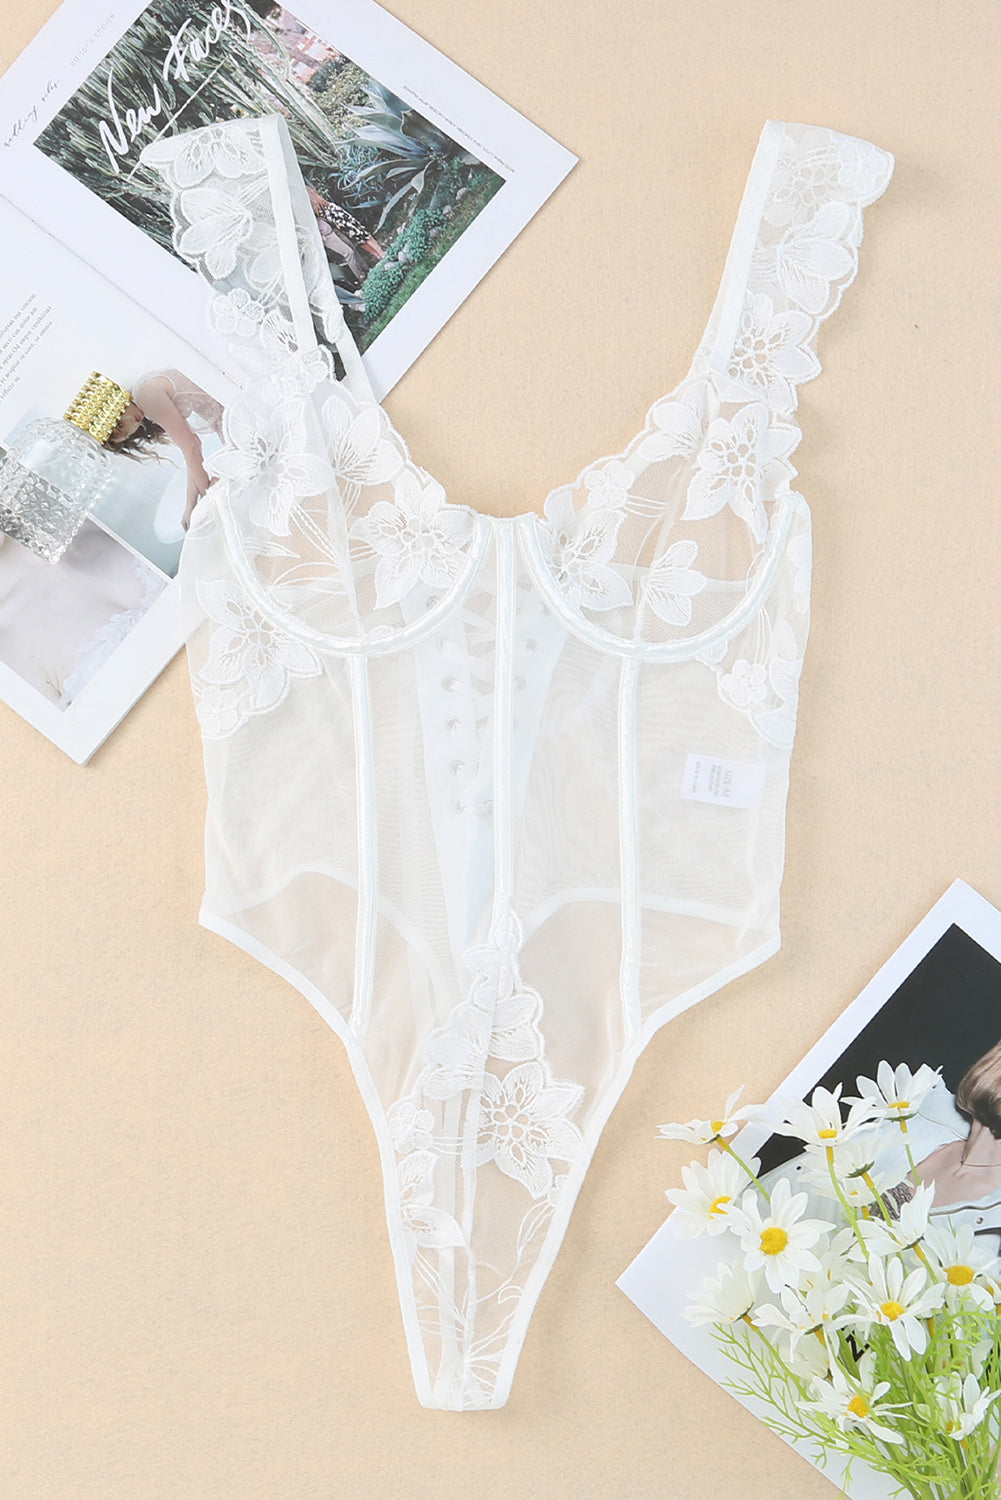 White Lily Floral Embroider Sheer Lace Up Teddy Teddy Lingerie JT's Designer Fashion